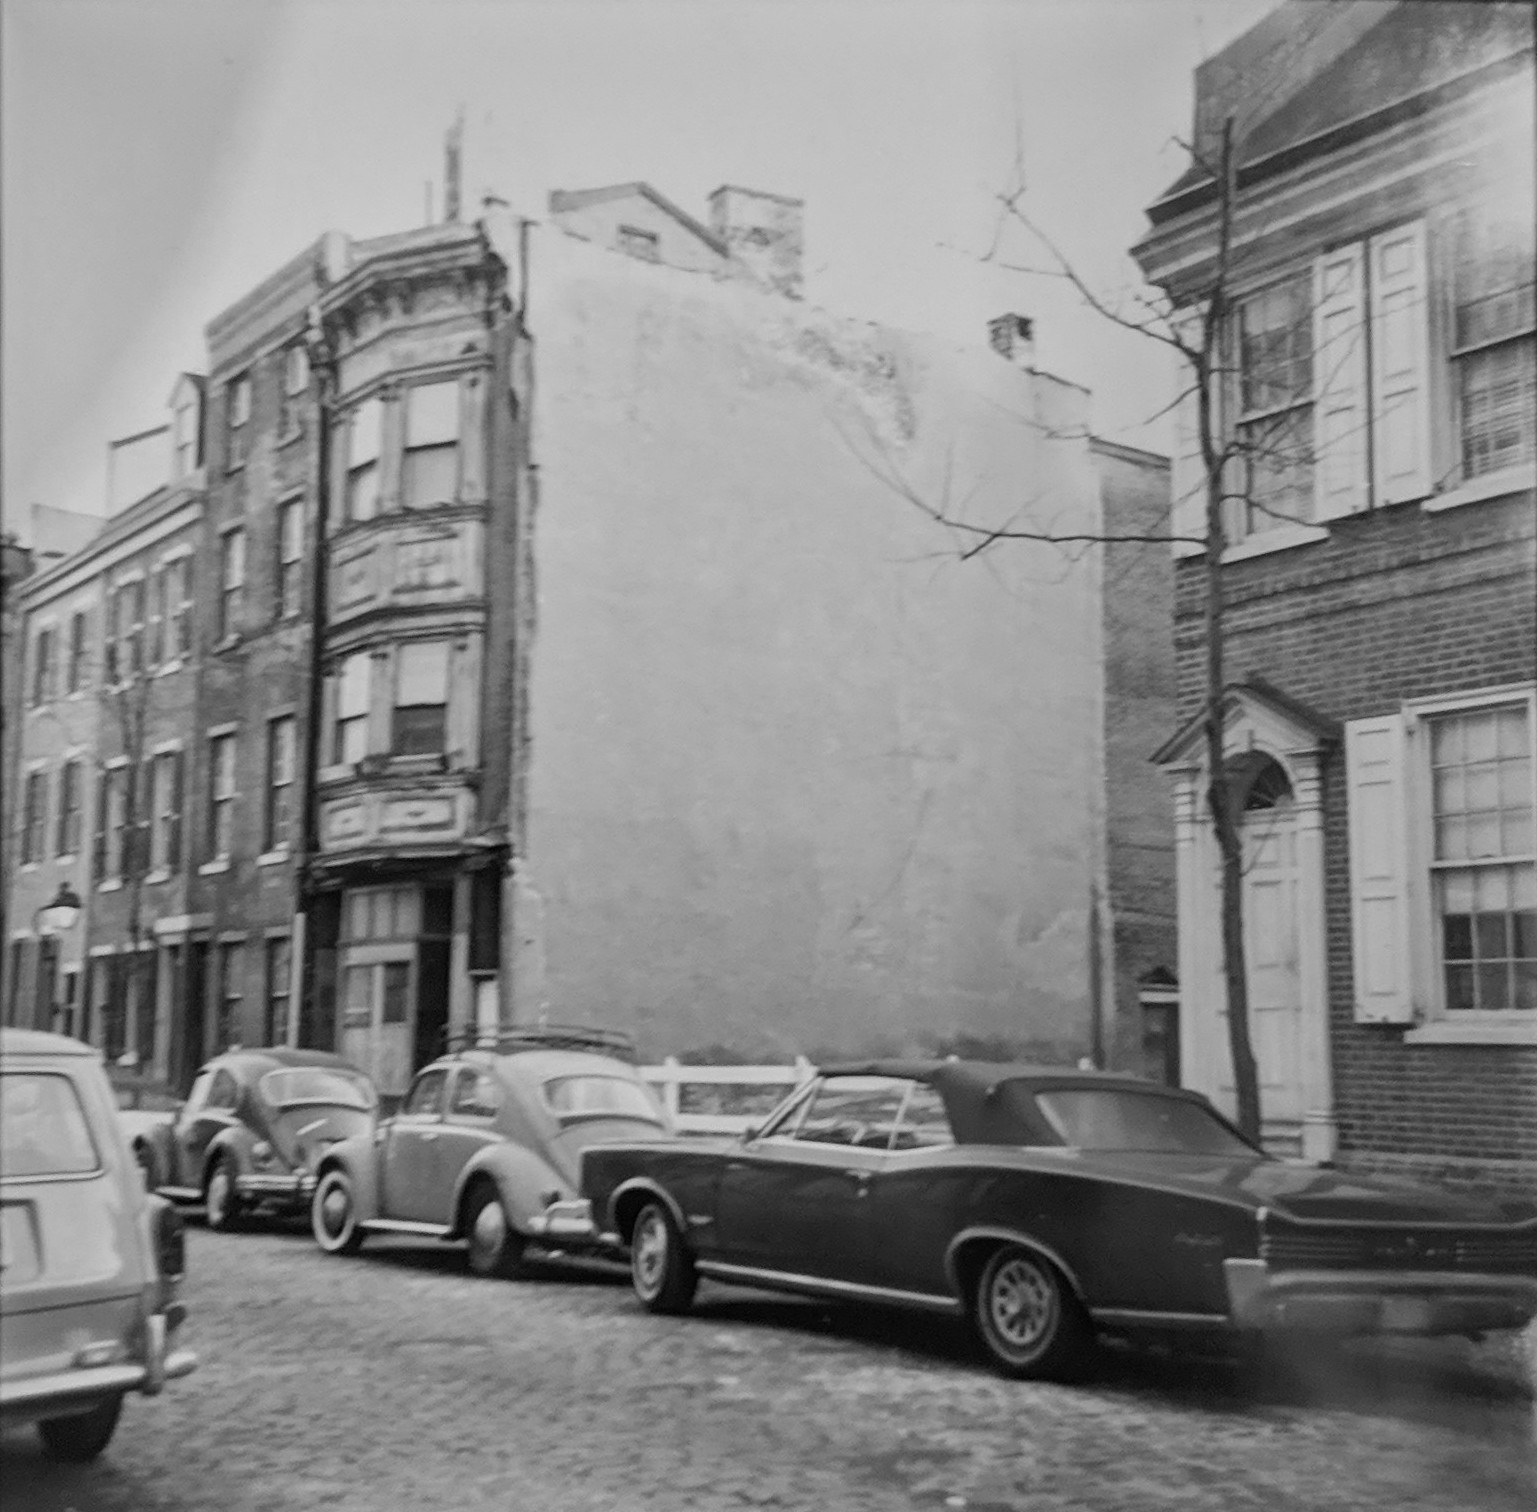 228-230 Delancey St - Empty Lot (Late 1960s)